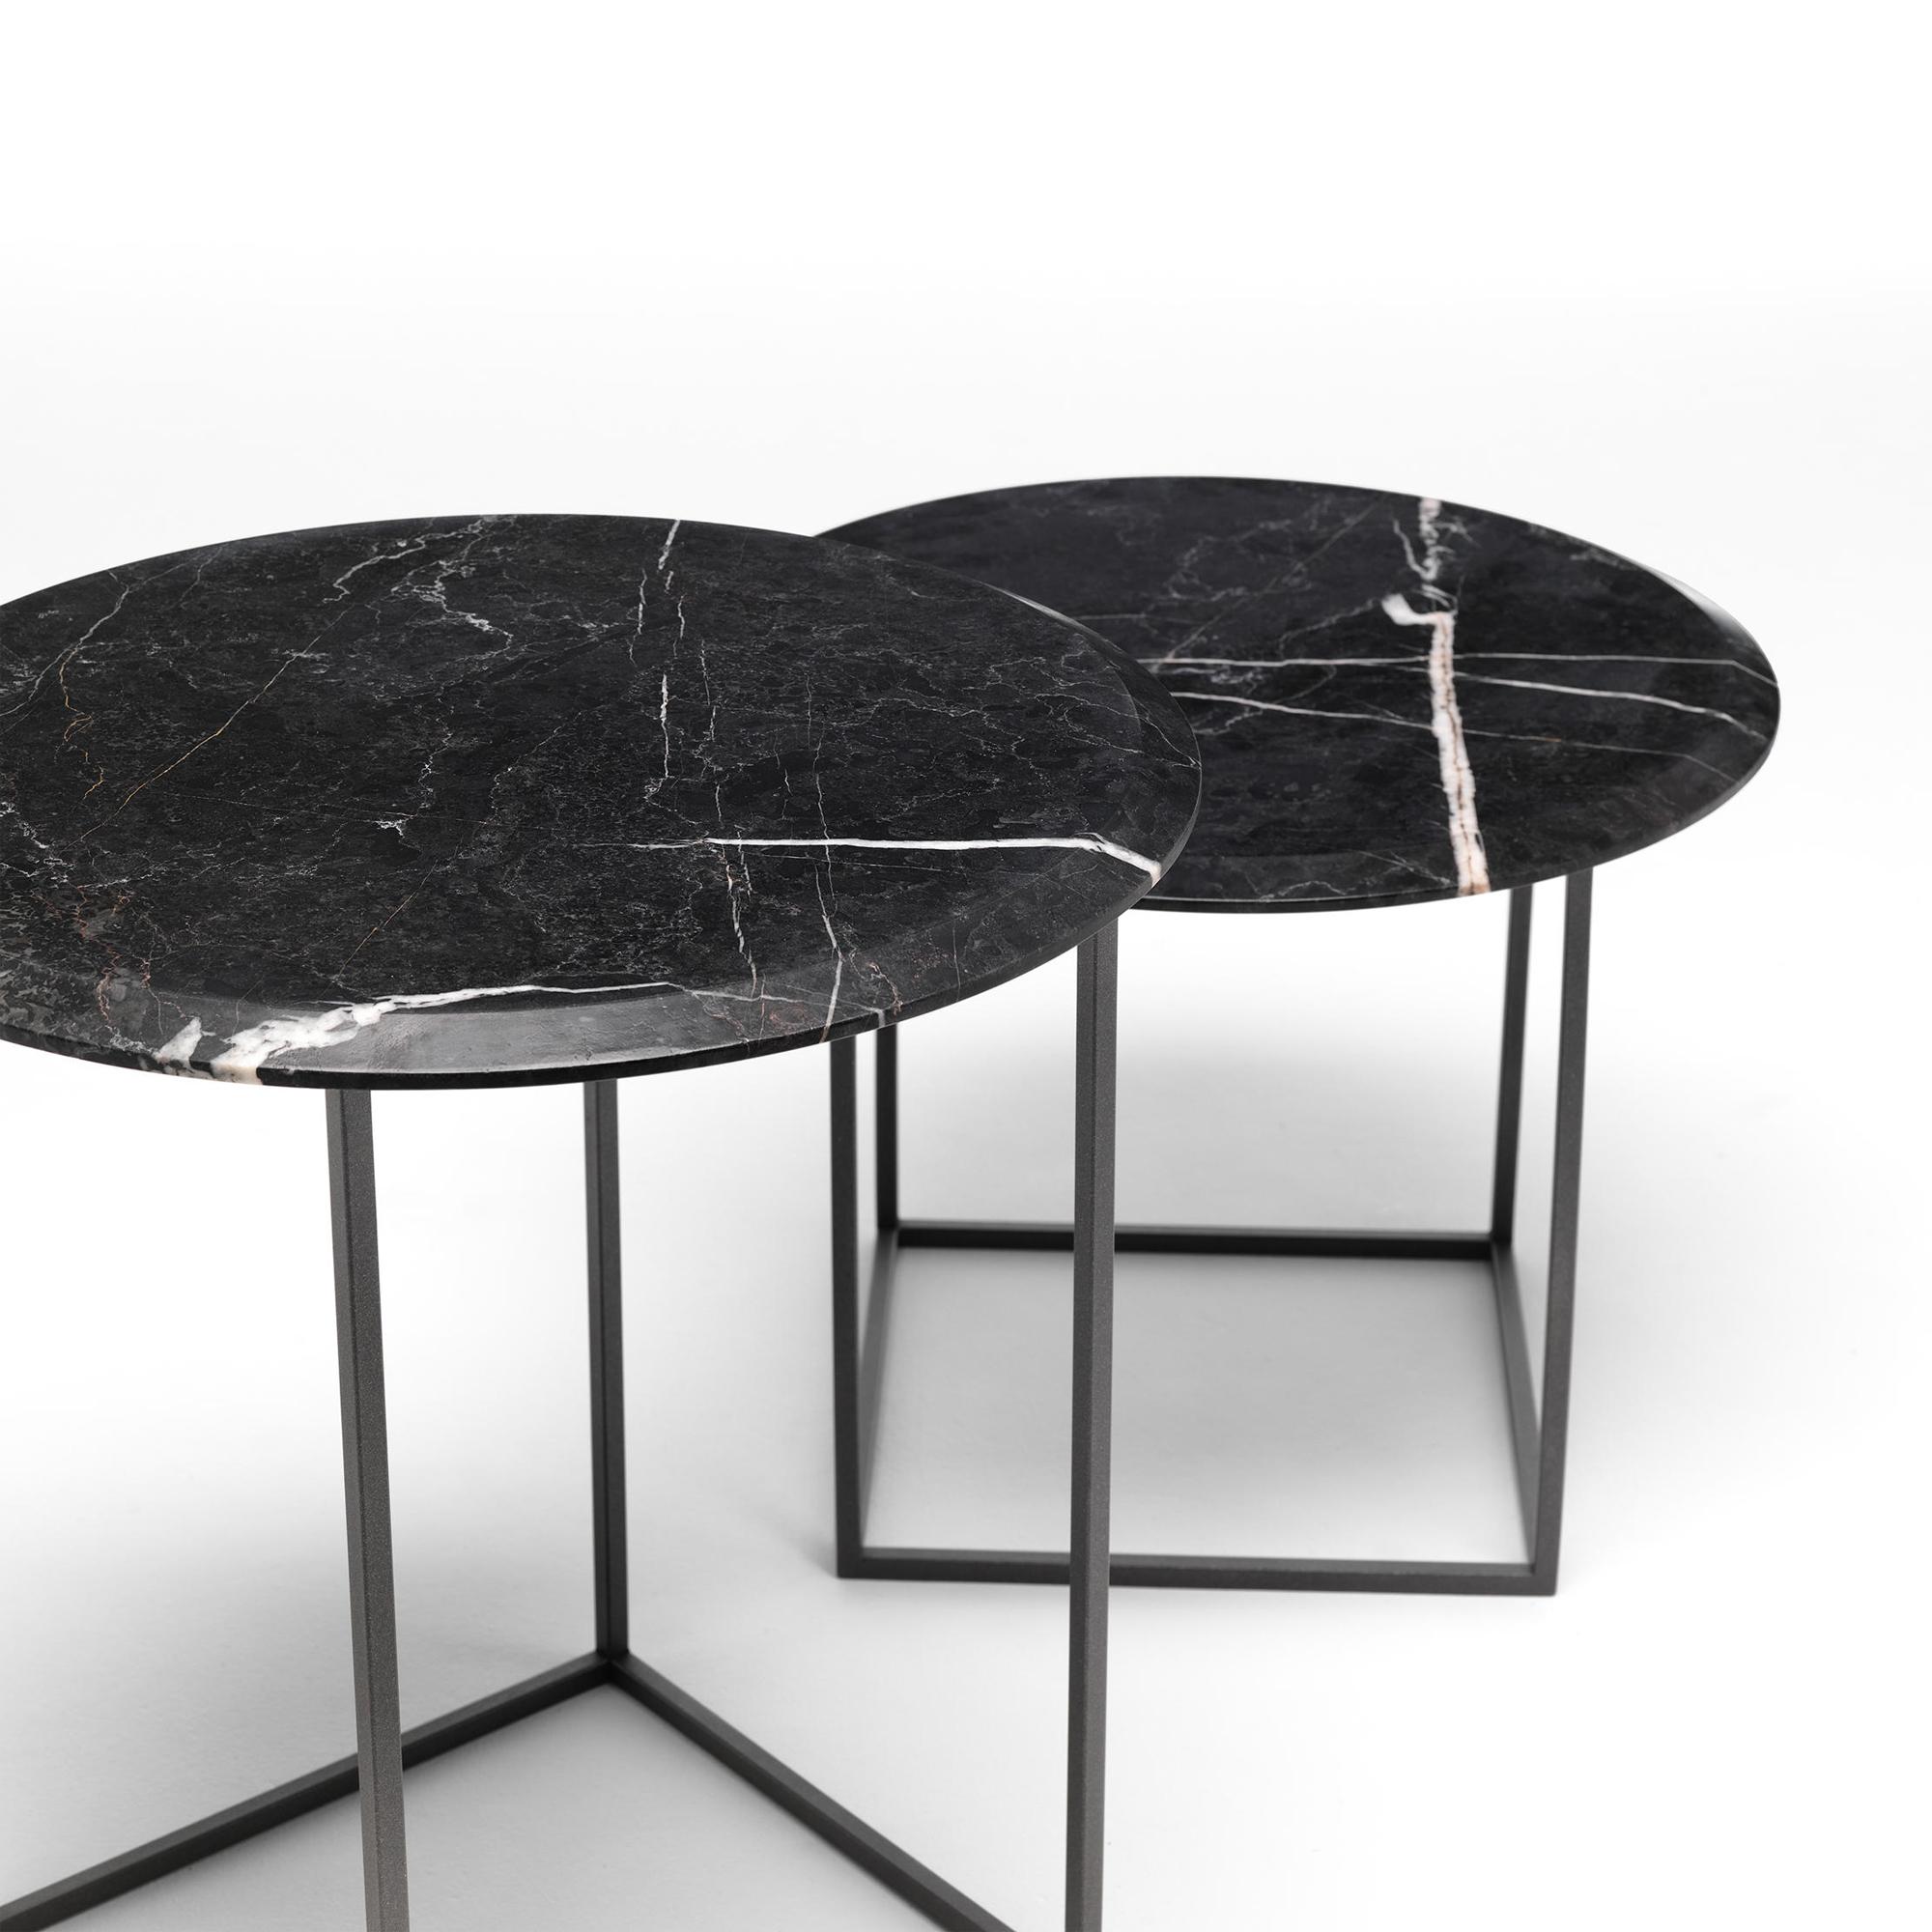 Carved 21st Century Modern Side Table With Painted Steel Base And Top In Solid Marble For Sale